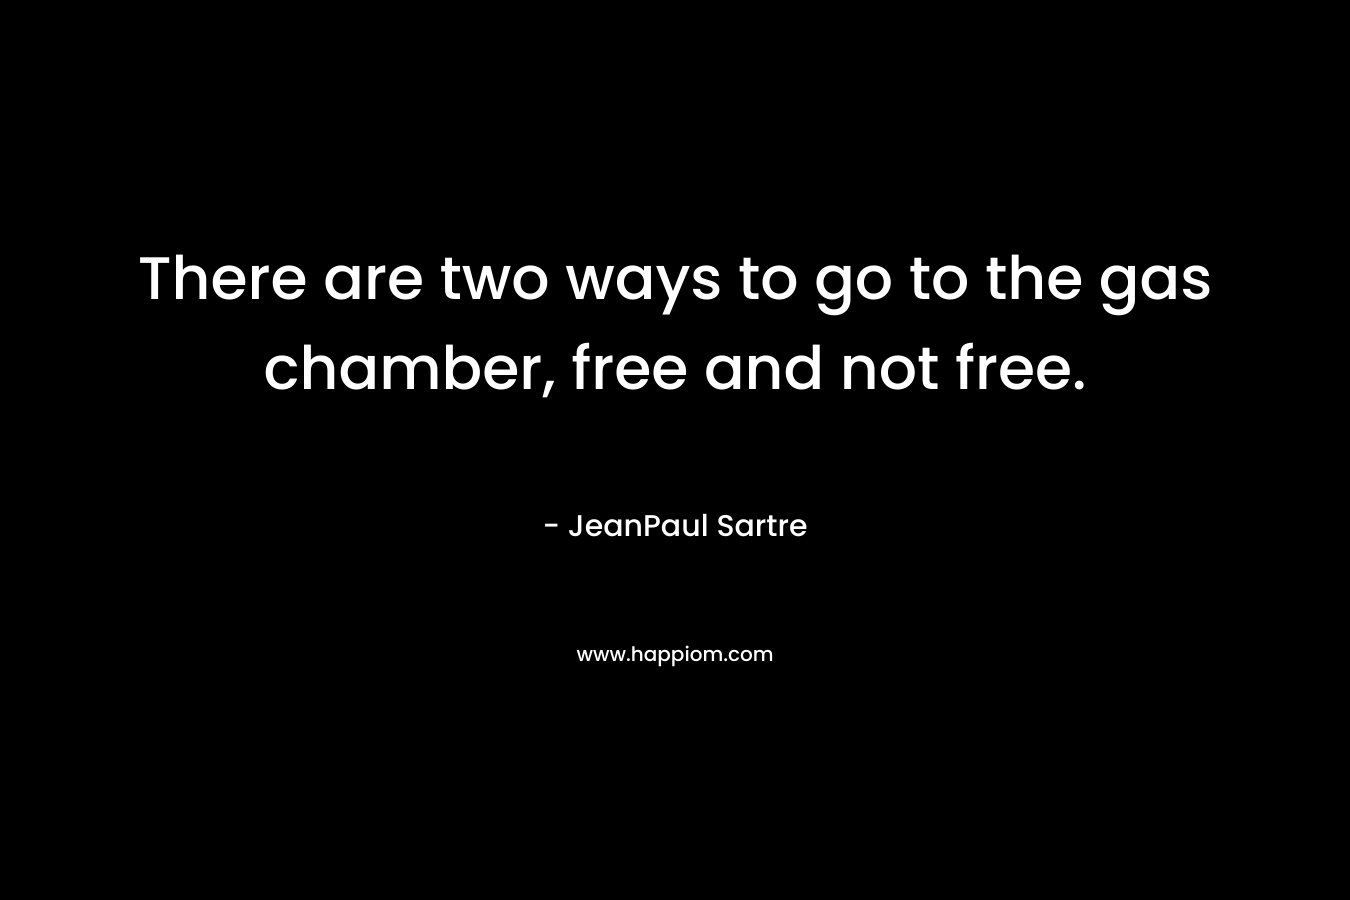 There are two ways to go to the gas chamber, free and not free.